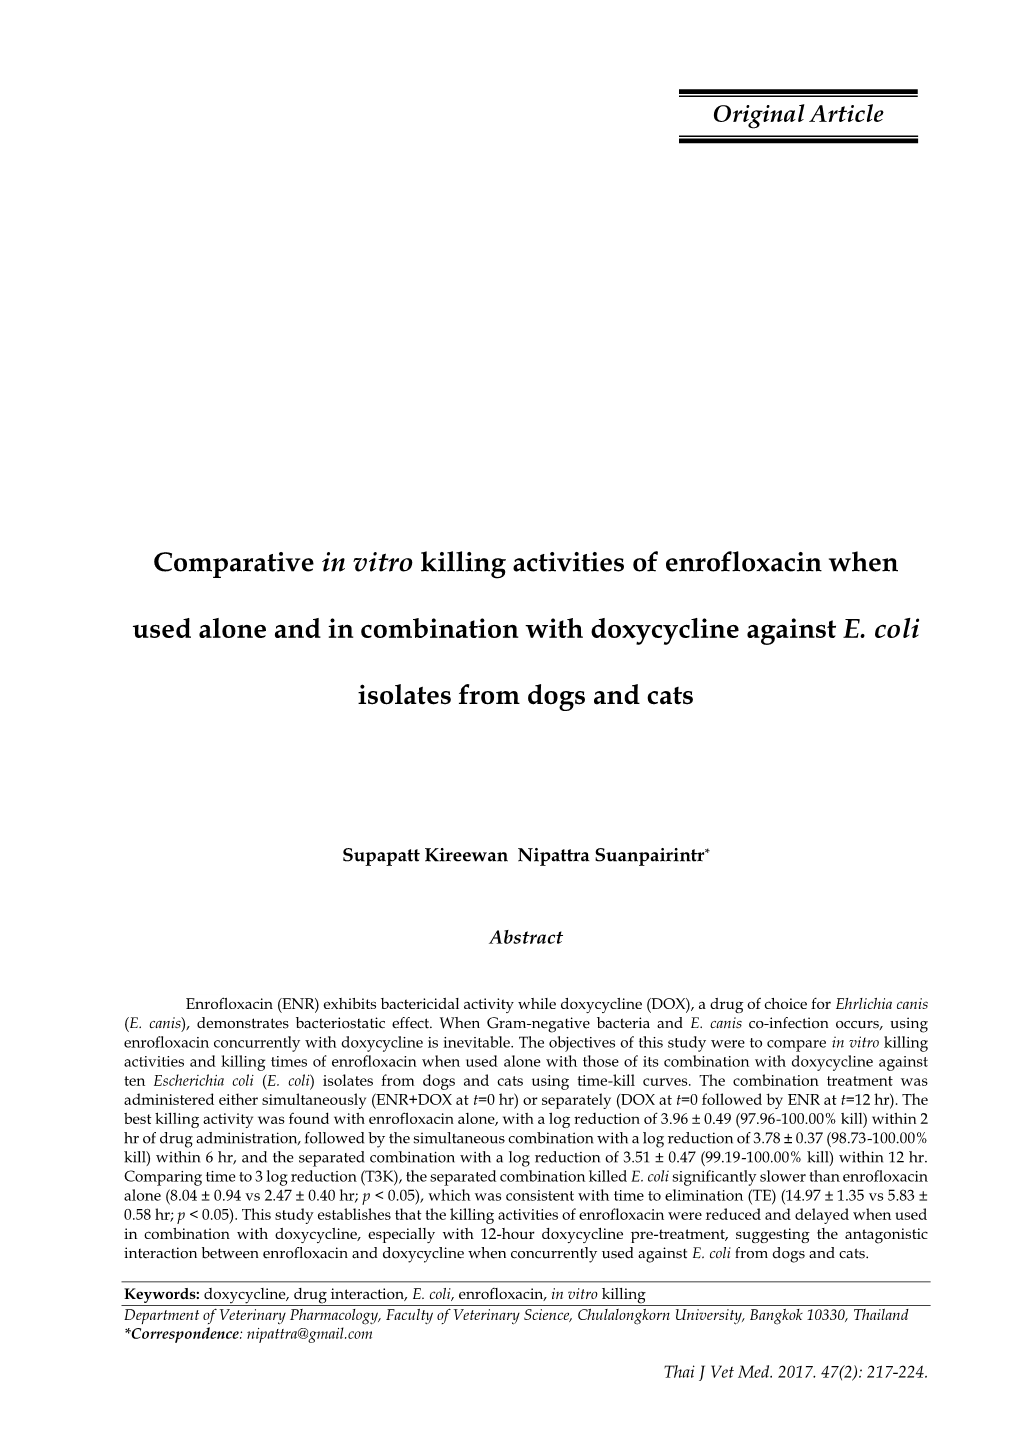 Comparative in Vitro Killing Activities of Enrofloxacin When Used Alone And